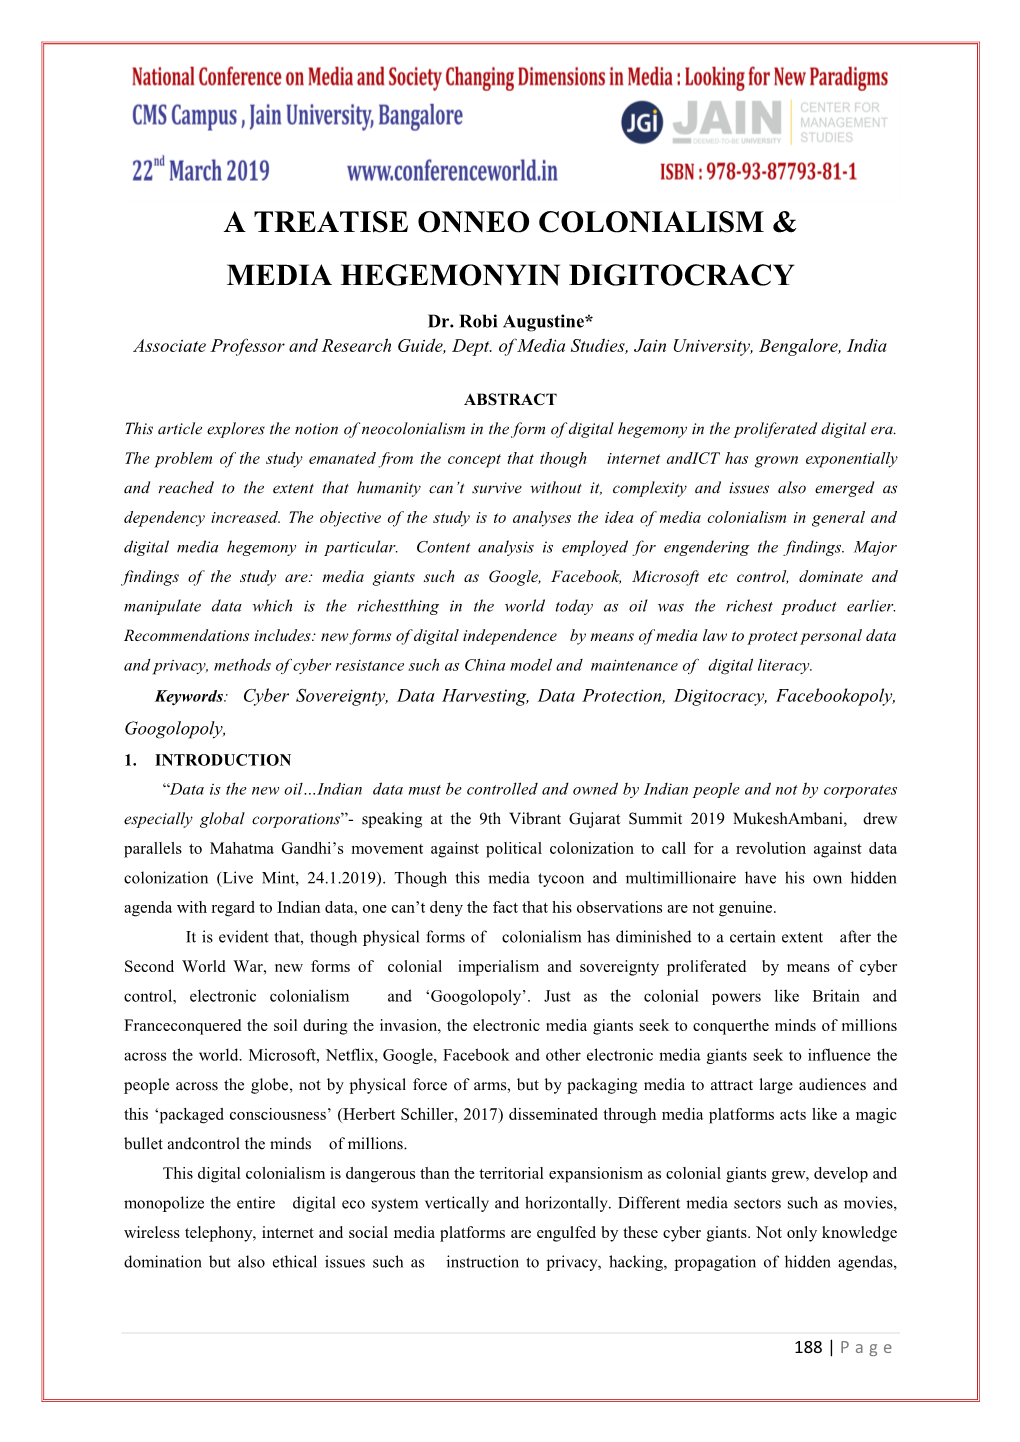 A Treatise on Neo Colonialism& New Media Hegemony in Digitocracy